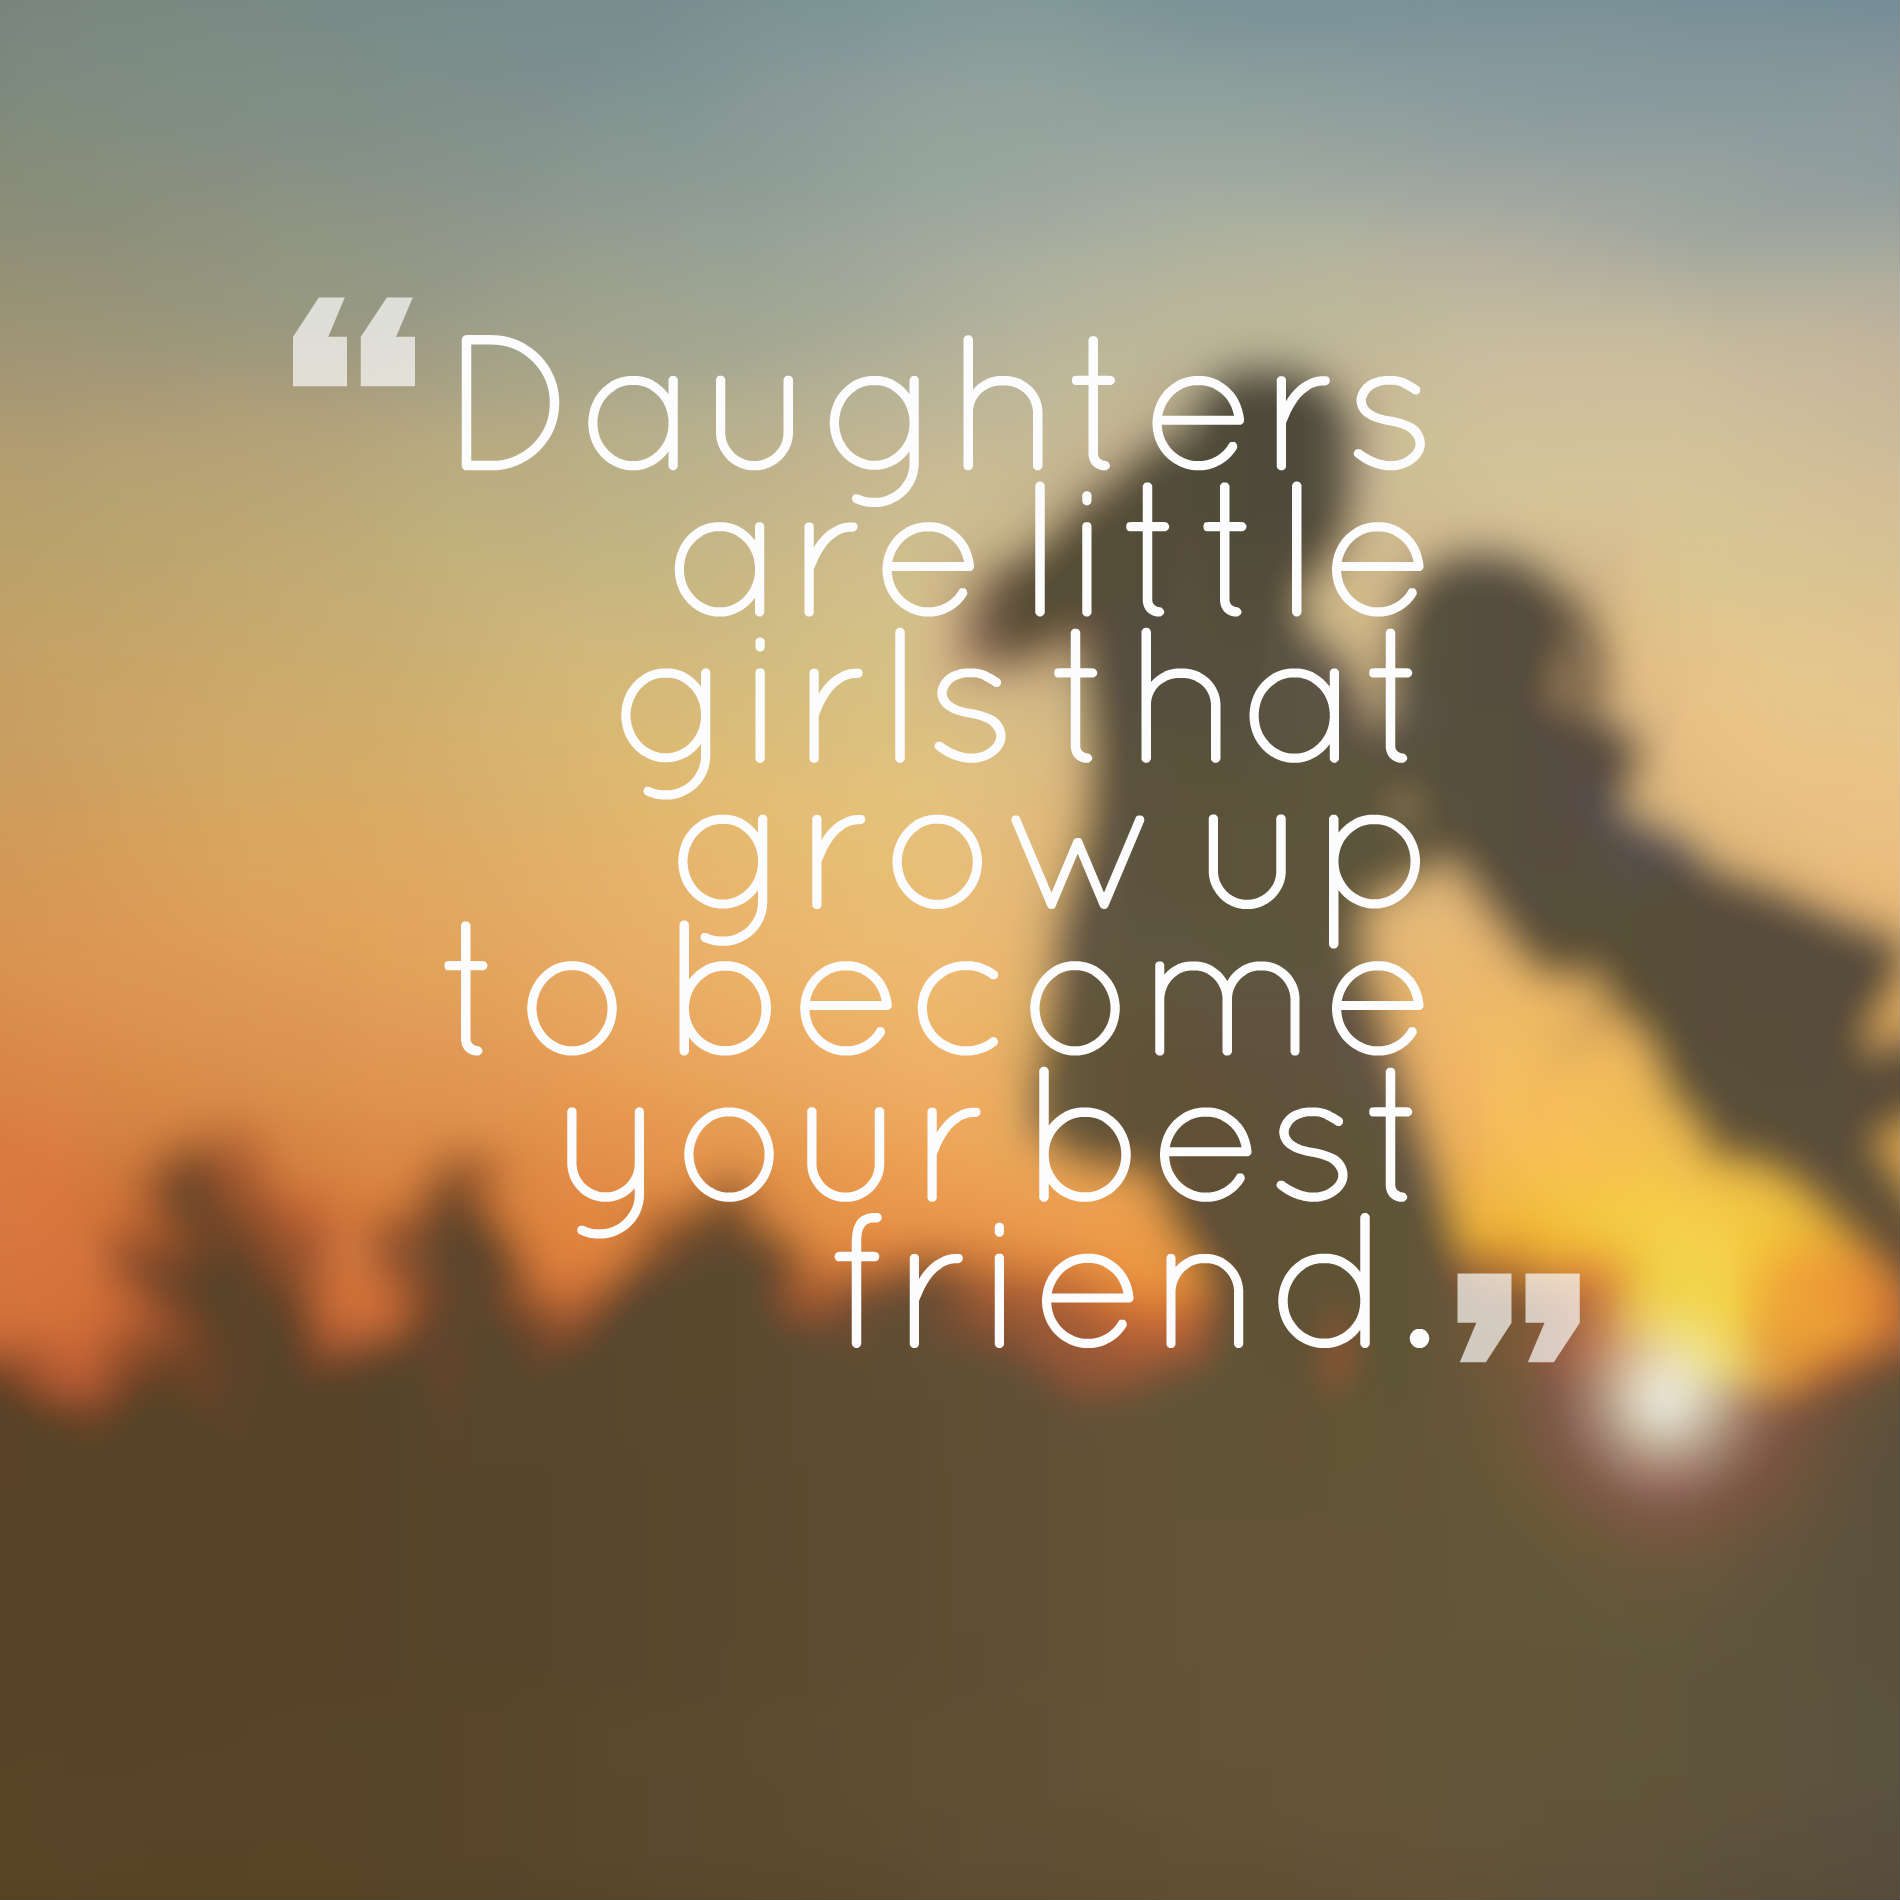 Daughters are little girls that grow up to become your best friend.